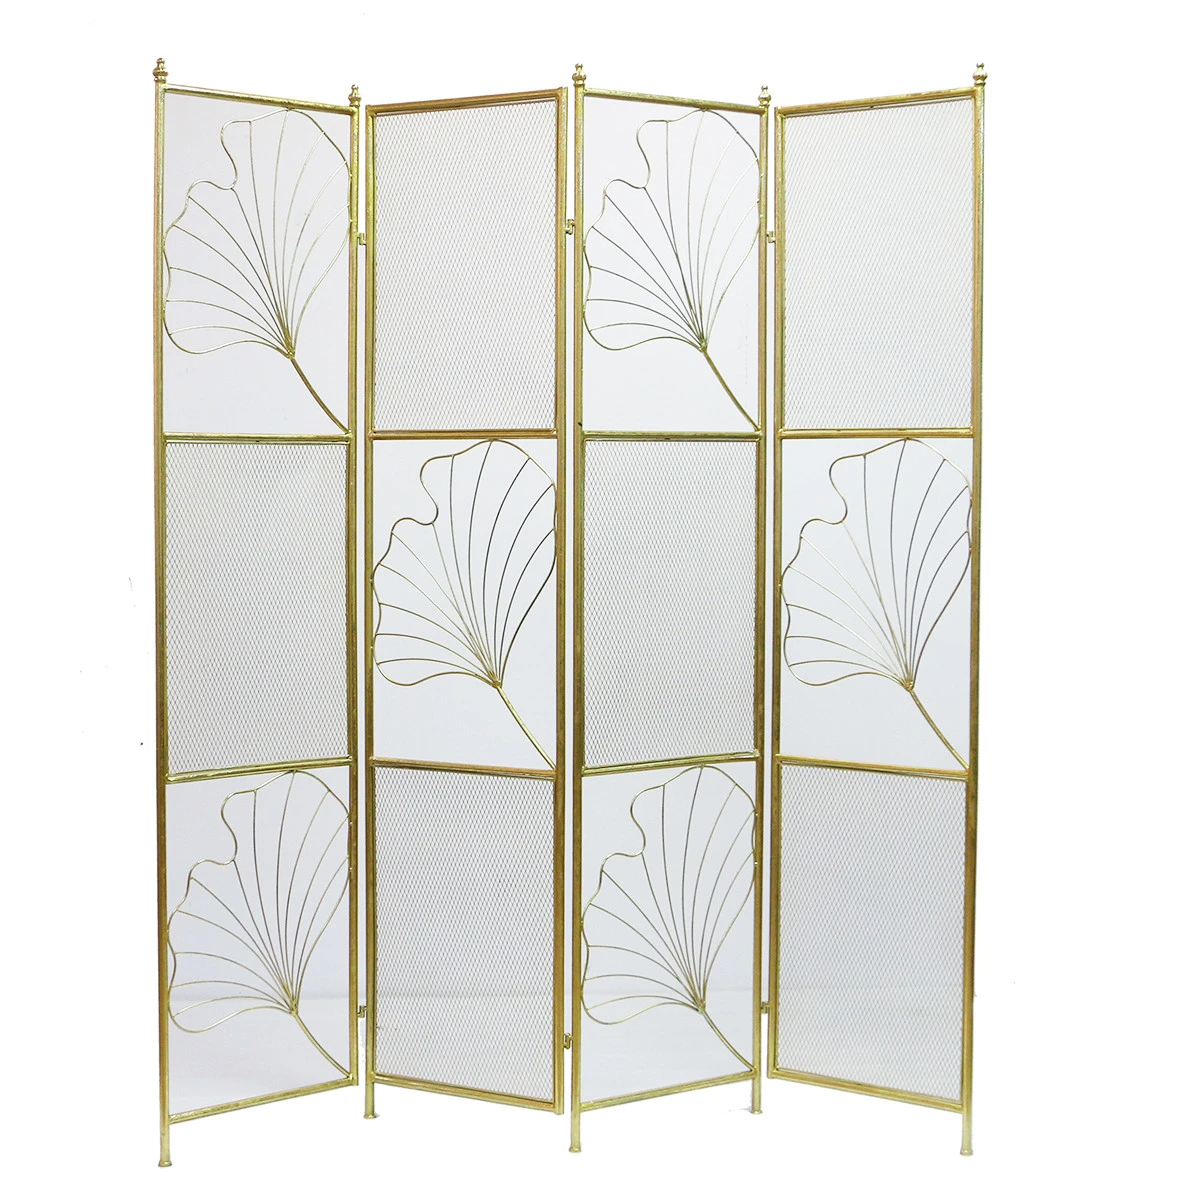 Room Divider Screen Panels Wall Decoration Metal Space Laser Quantity Gold Classic